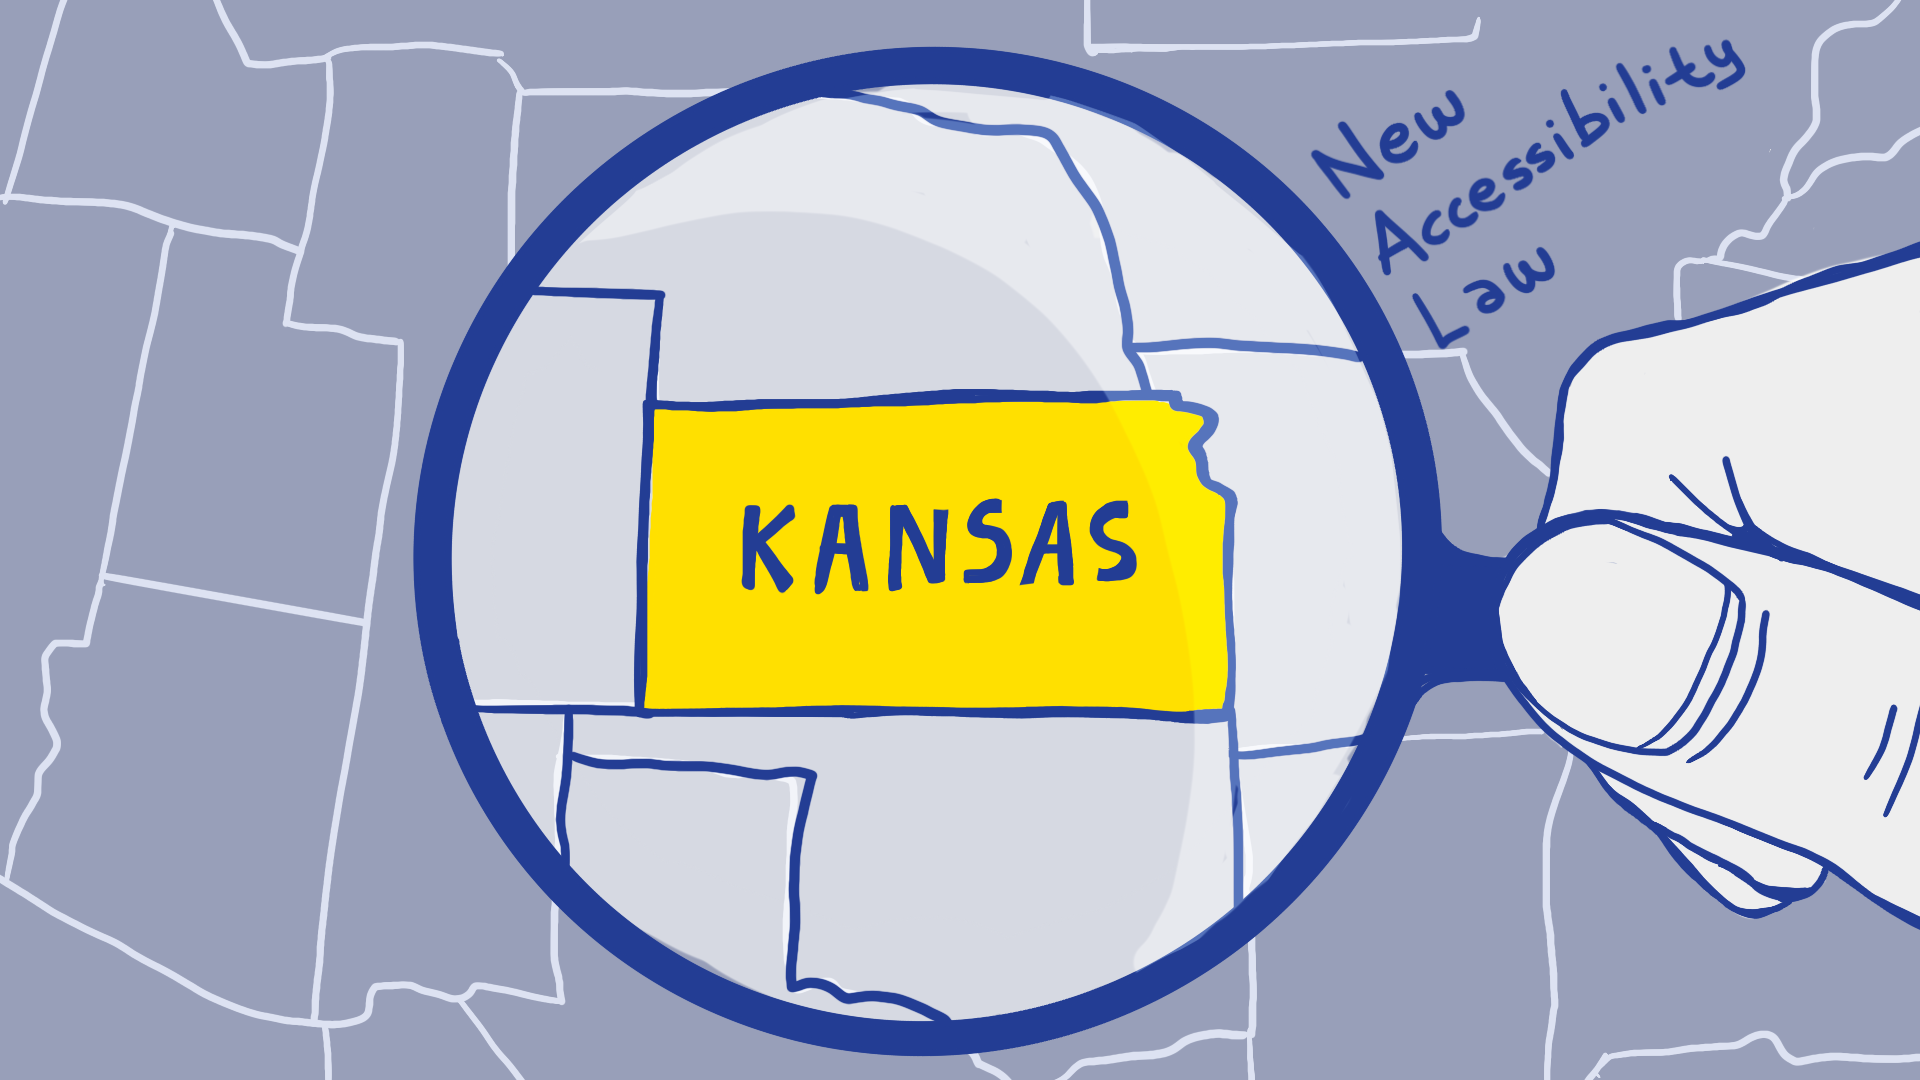 Closeup of US map with a magnifying glass over spotlighted Kansas "New accessibility law"